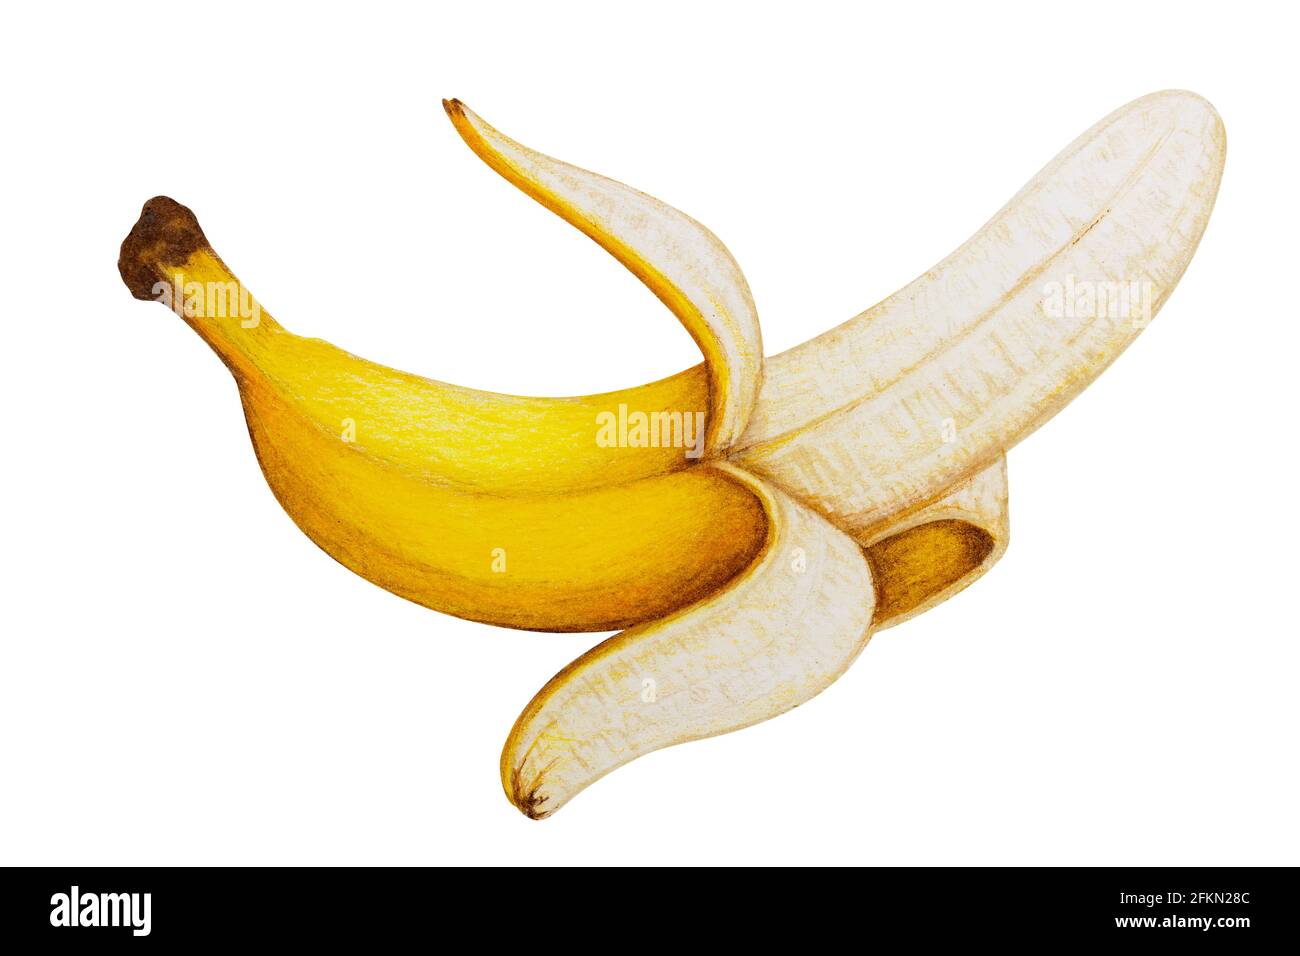 Peeled banana painted by colored pencils, isolated on white with clipping path for easy use. Stock Photo